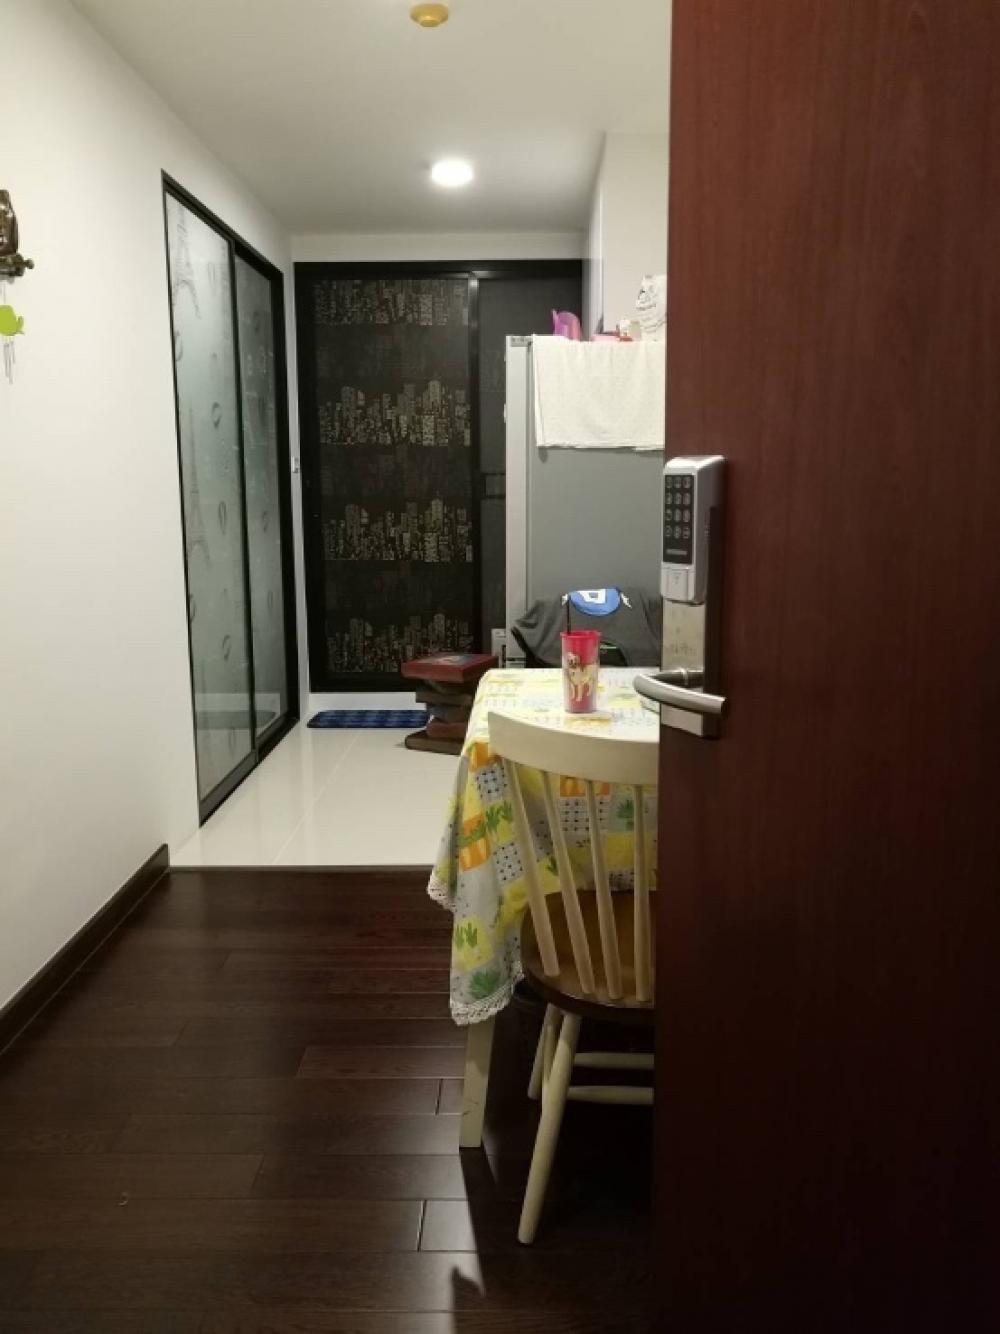 For SaleCondoBang kae, Phetkasem : Condo for sale Bangkok Feliz @ Bangkae Station Bangkok Feliz @ Bangkae Station, 2nd floor, corner room, 1 bedroom, 1 living room (can be made into a bedroom) and 1 hall, balcony facing south, not hot, room location is very good. The room is in very good c